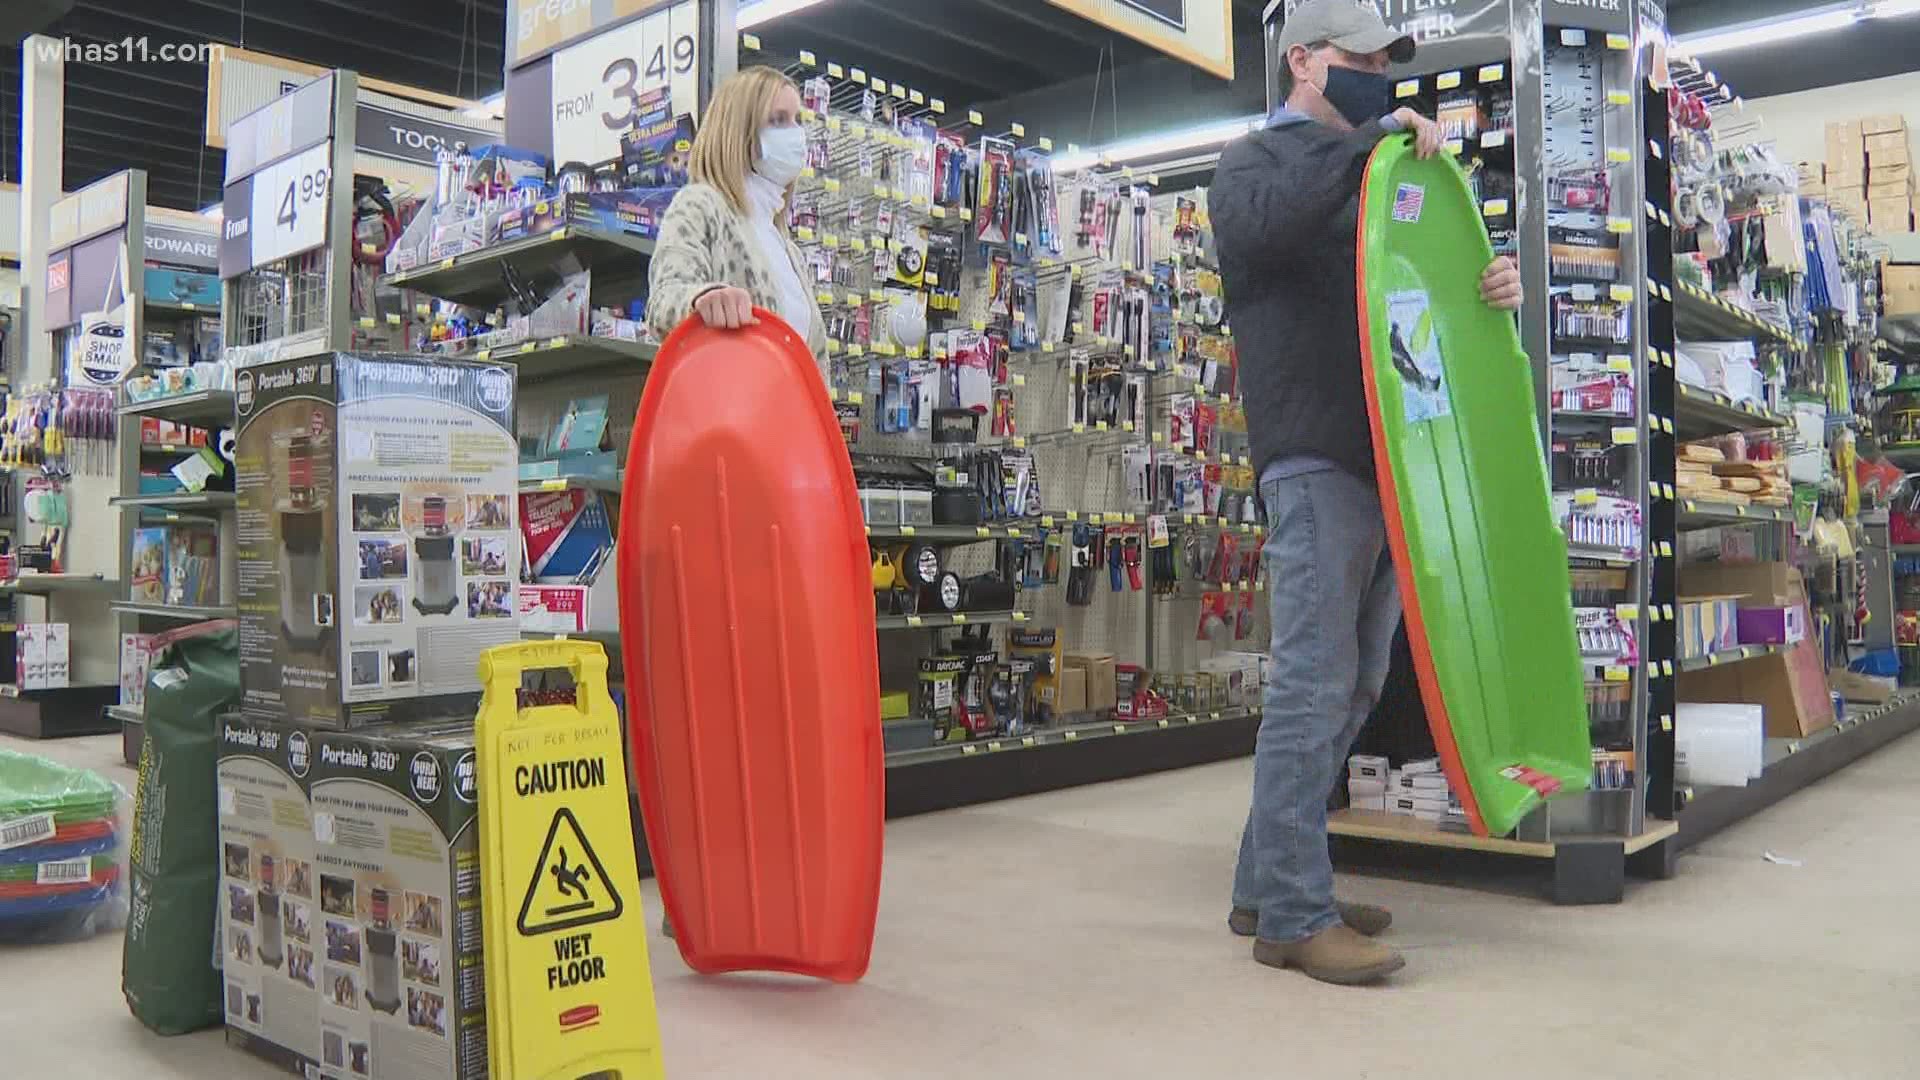 The phones and stores were abuzz with customers looking to find salt and other supplies.